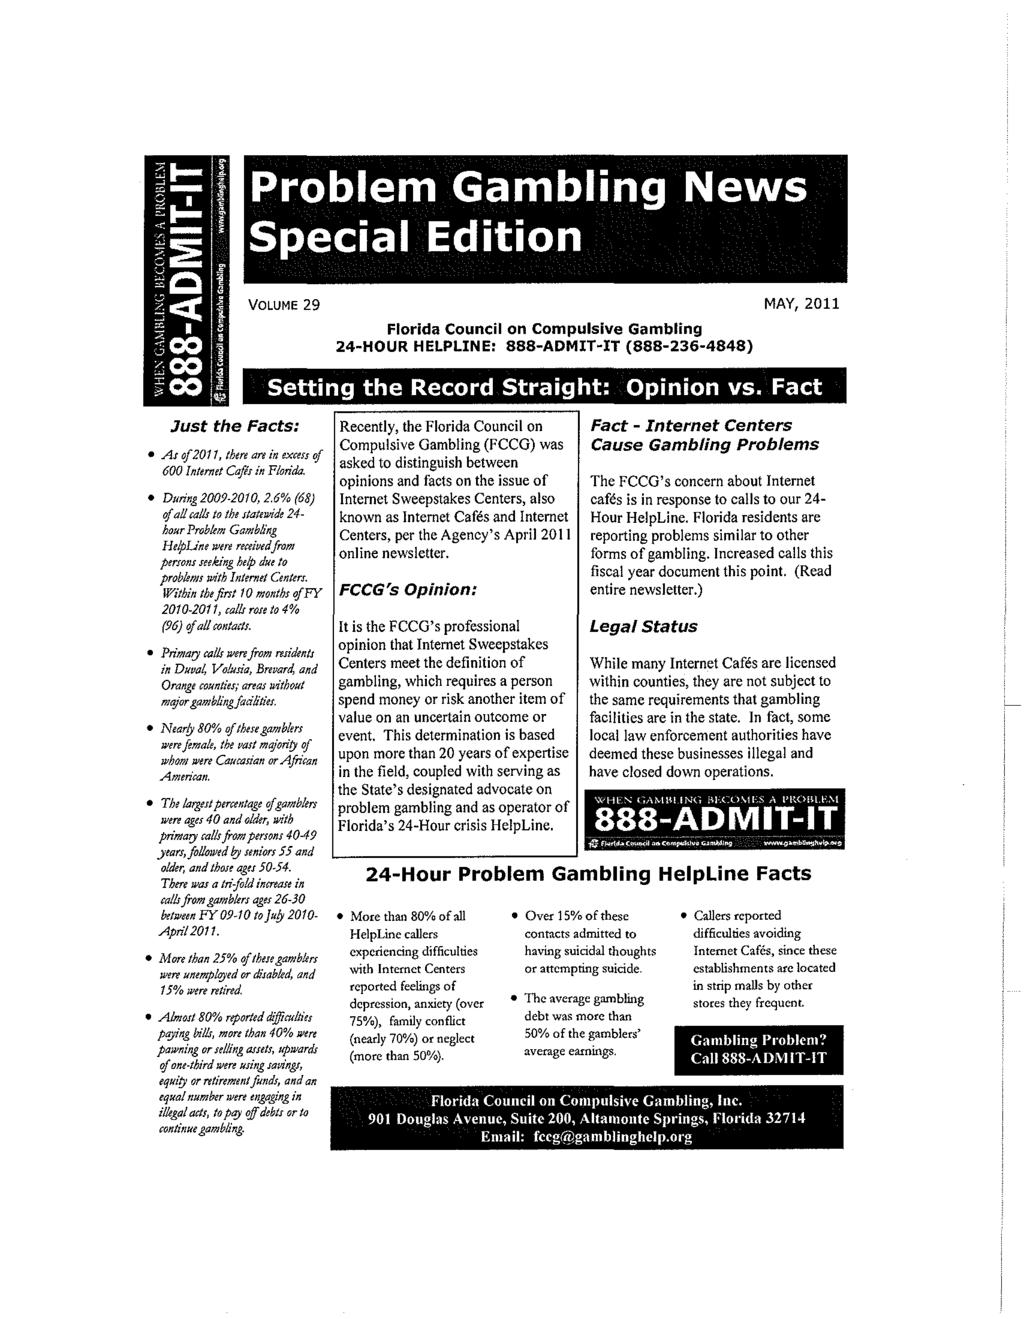 Problem Gambling News Sp~cial Edition VOLUME 29 Florida Council on Compulsive Gambling 24-HOUR HELPLINE: 888-ADMIT-IT (888-236-4848) MAY, 2011 Setting the Record Straight: Opinion vs.